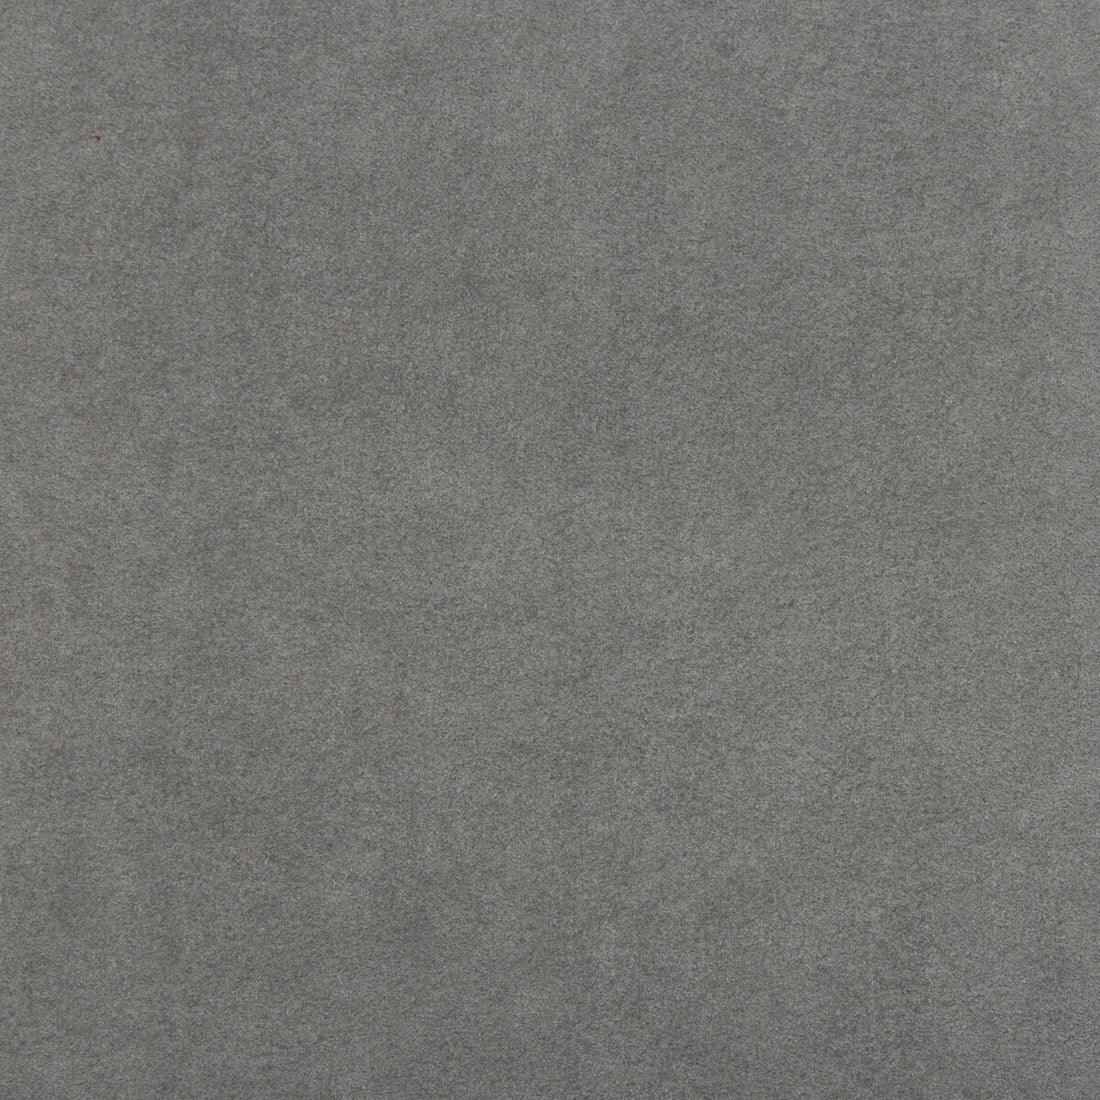 Ultimate fabric in pewter color - pattern 960122.21.0 - by Lee Jofa in the Ultimate Suede collection